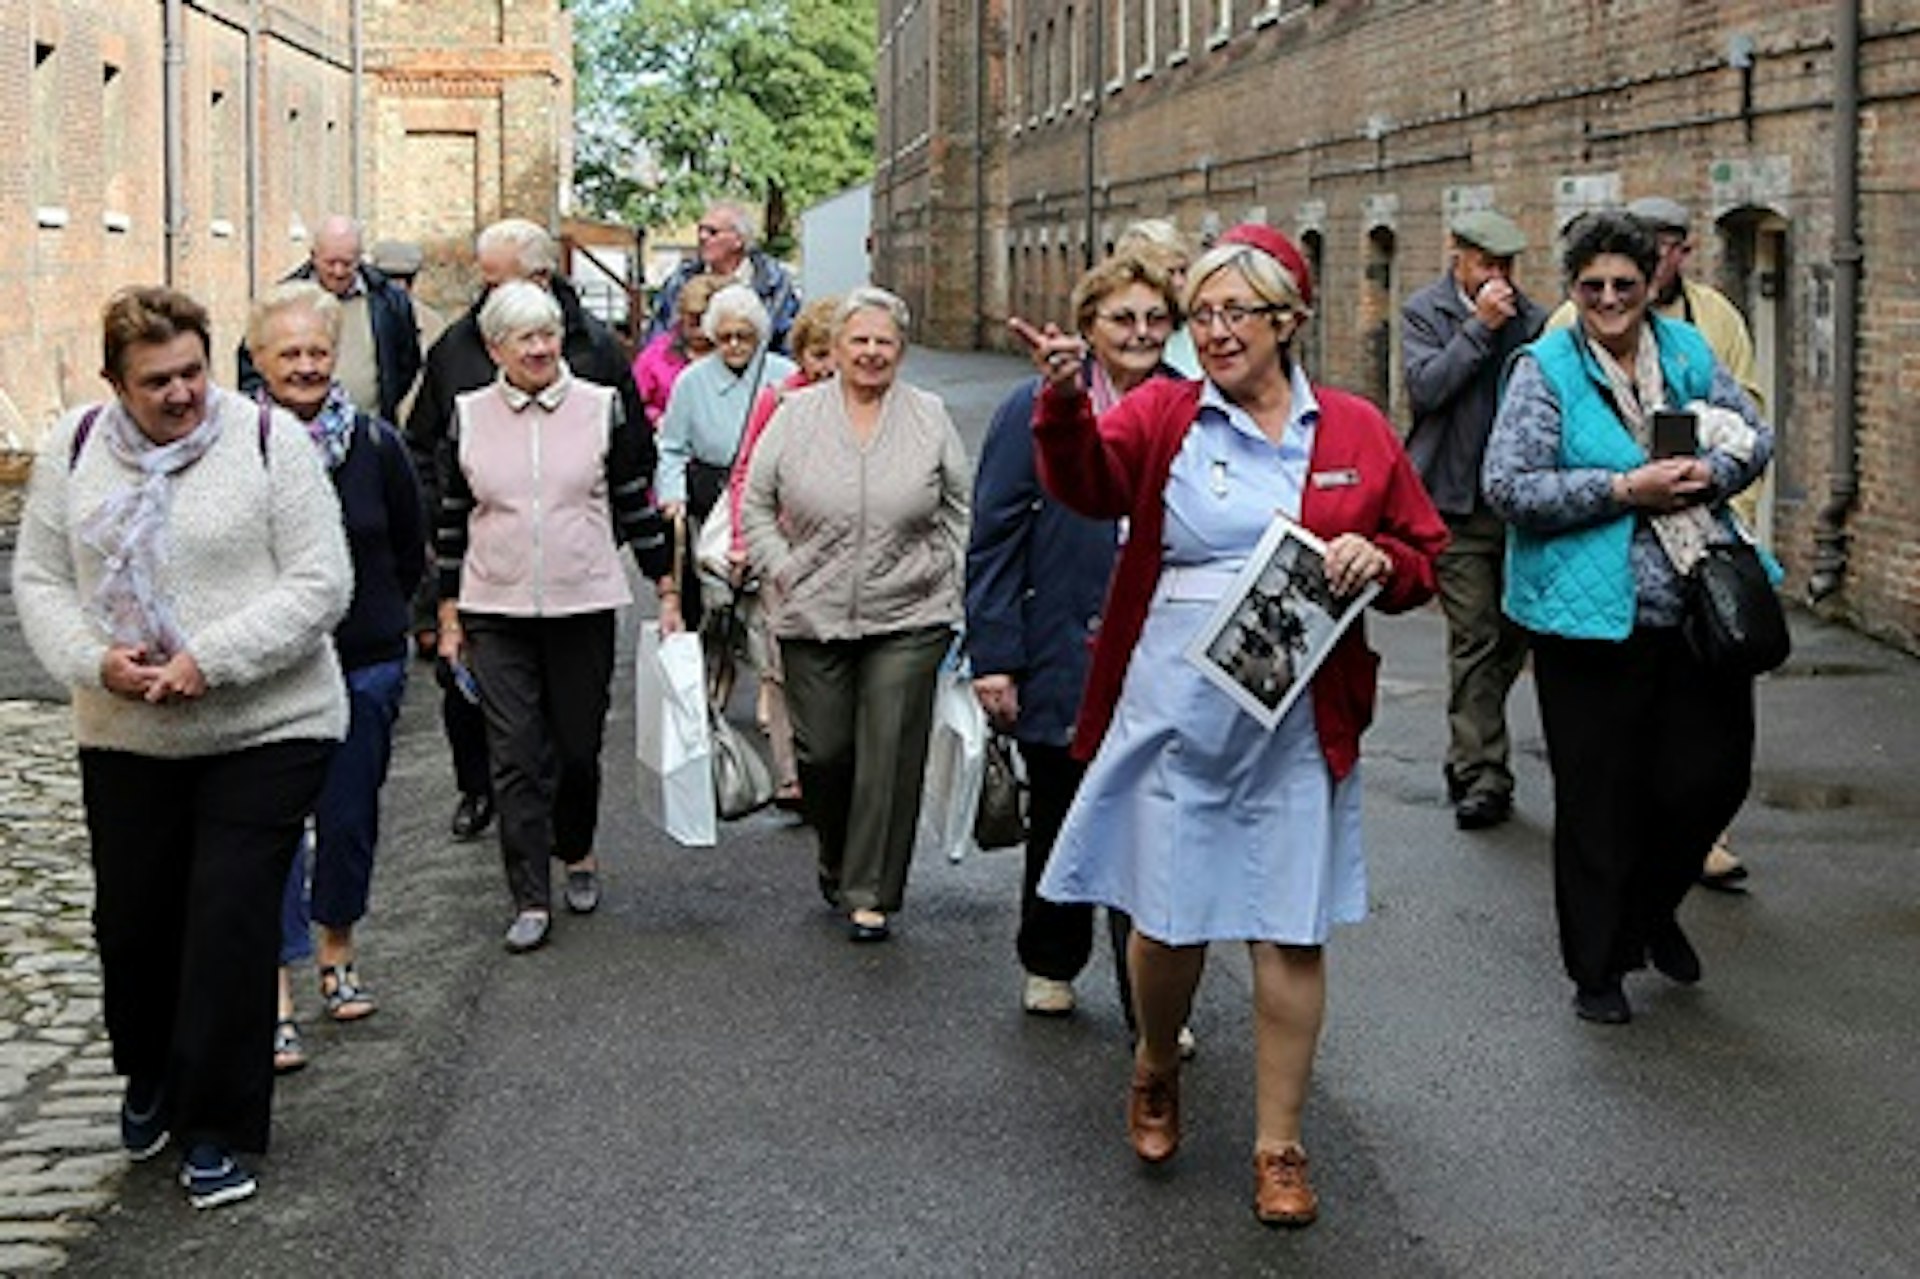 Call the Midwife Tour at The Historic Dockyard Chatham for Two 1